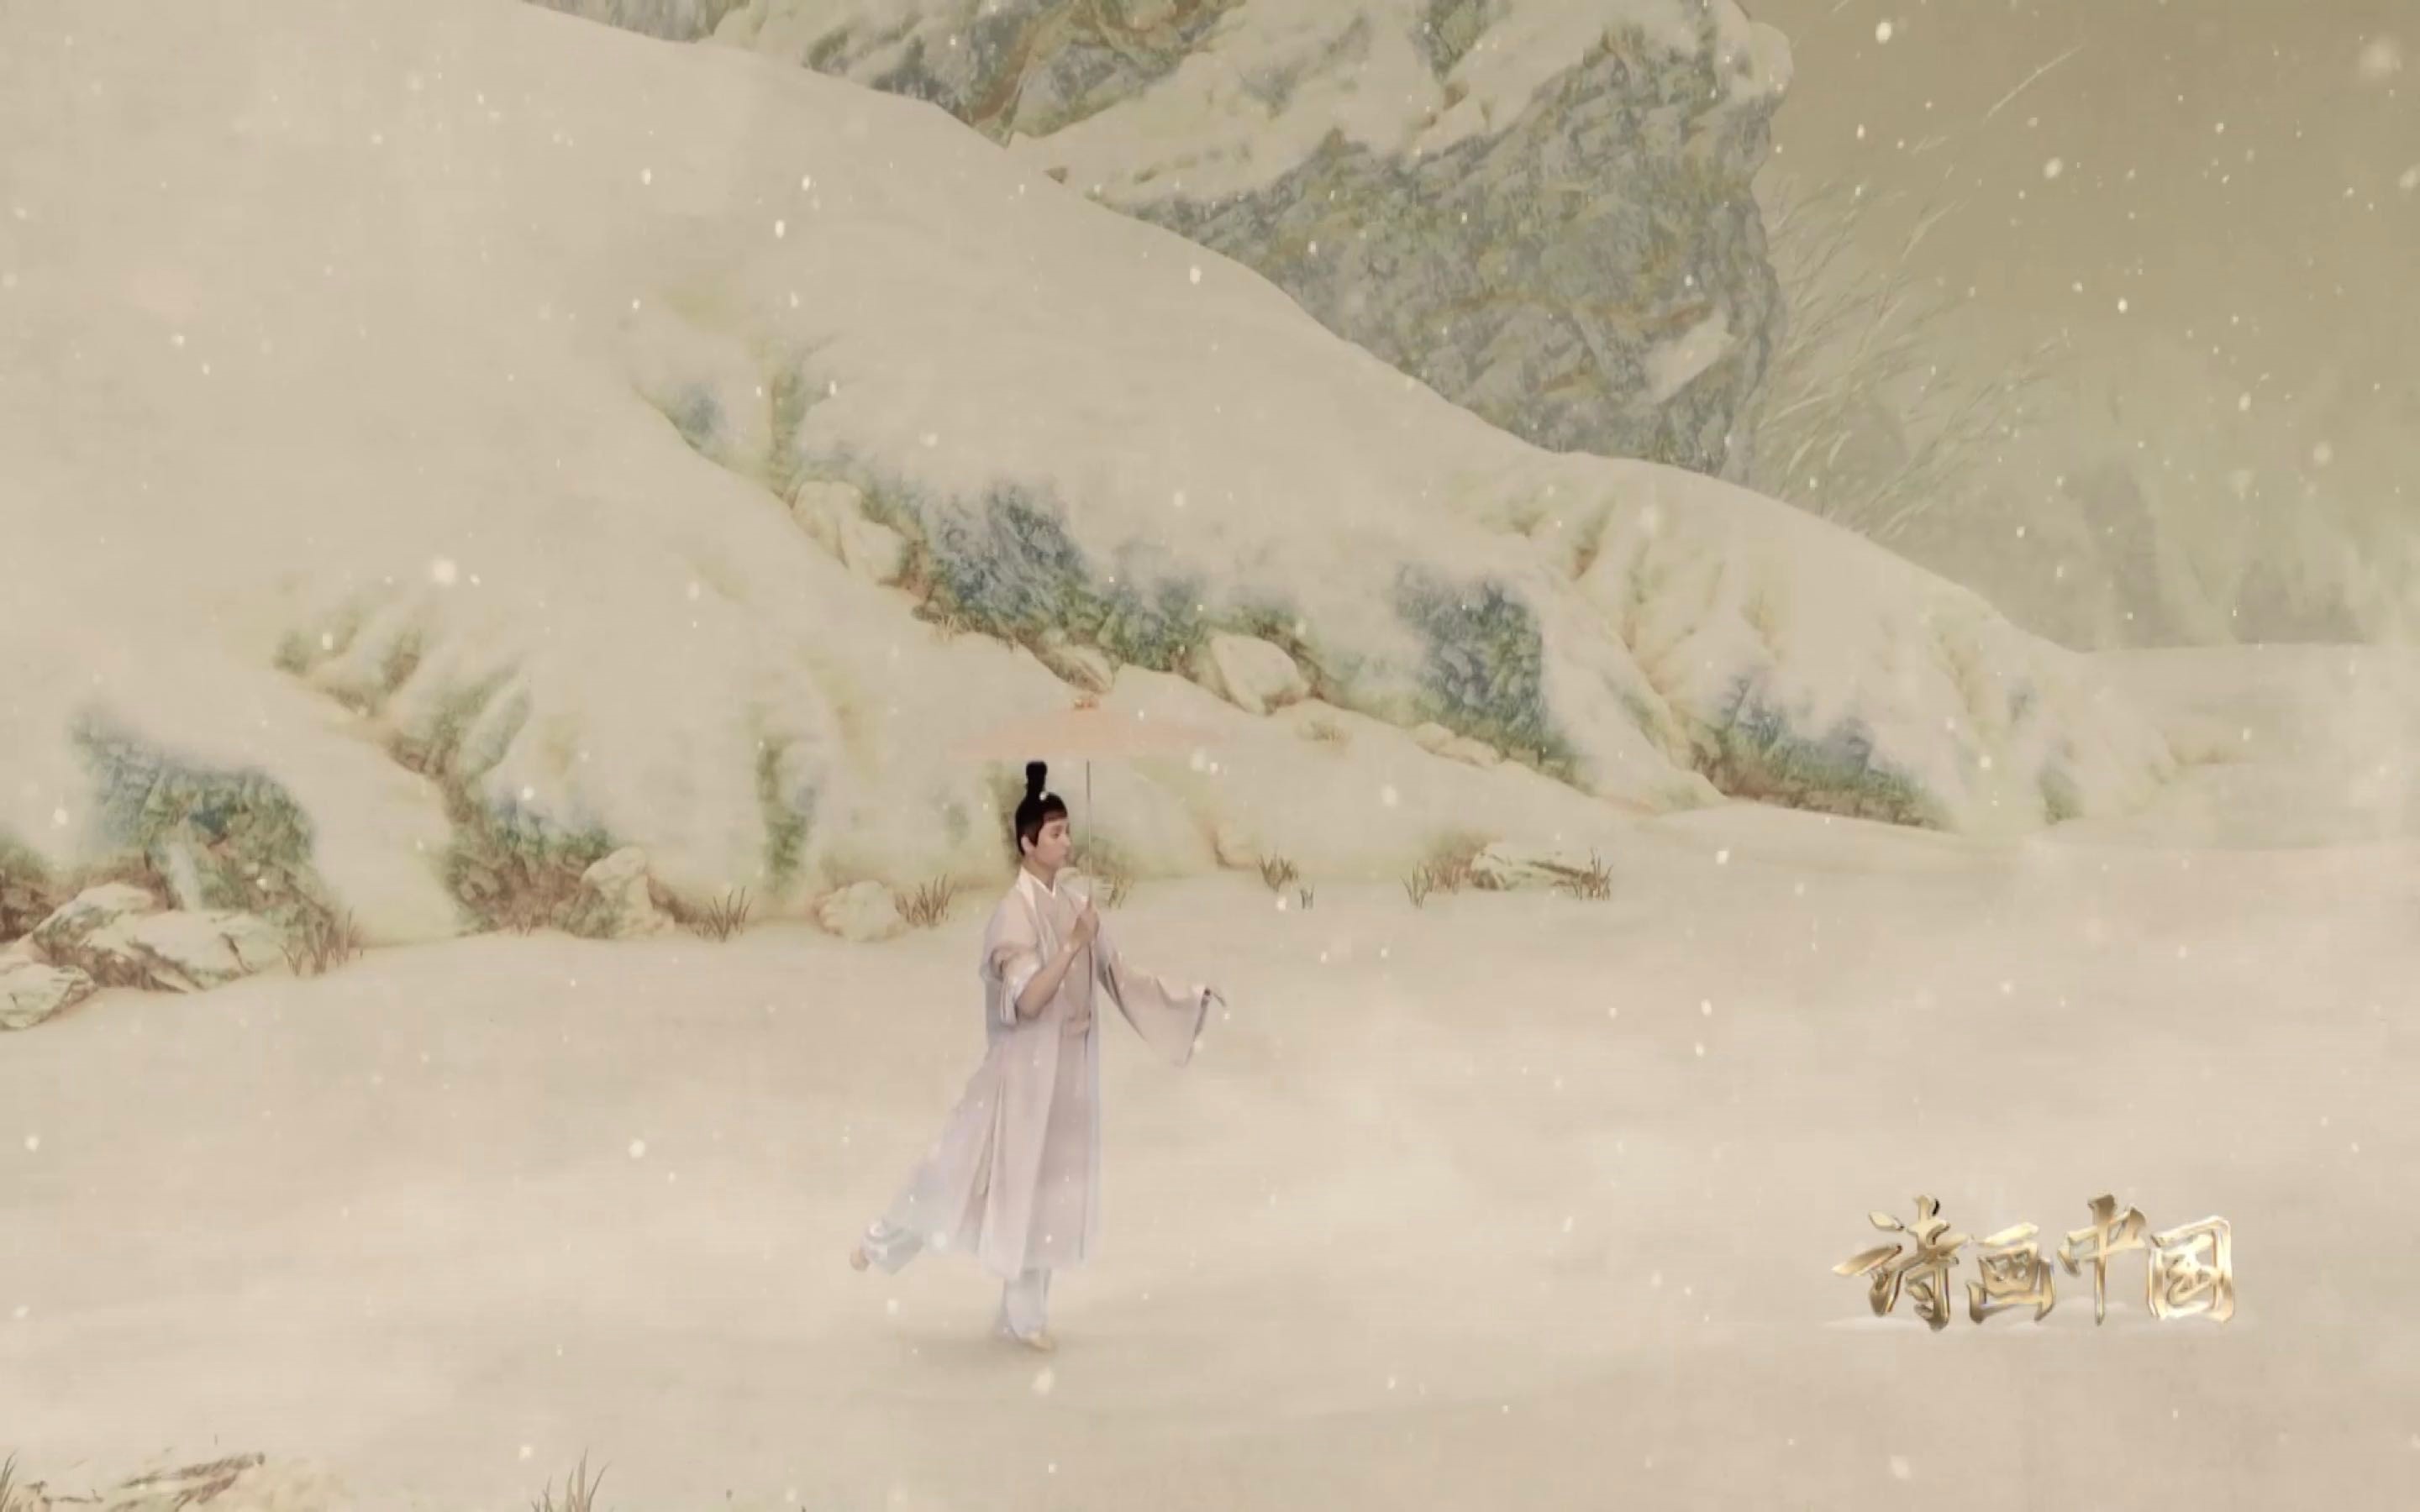 Li Xiang portrays the ambling figure depicted in the painting. /CGTN